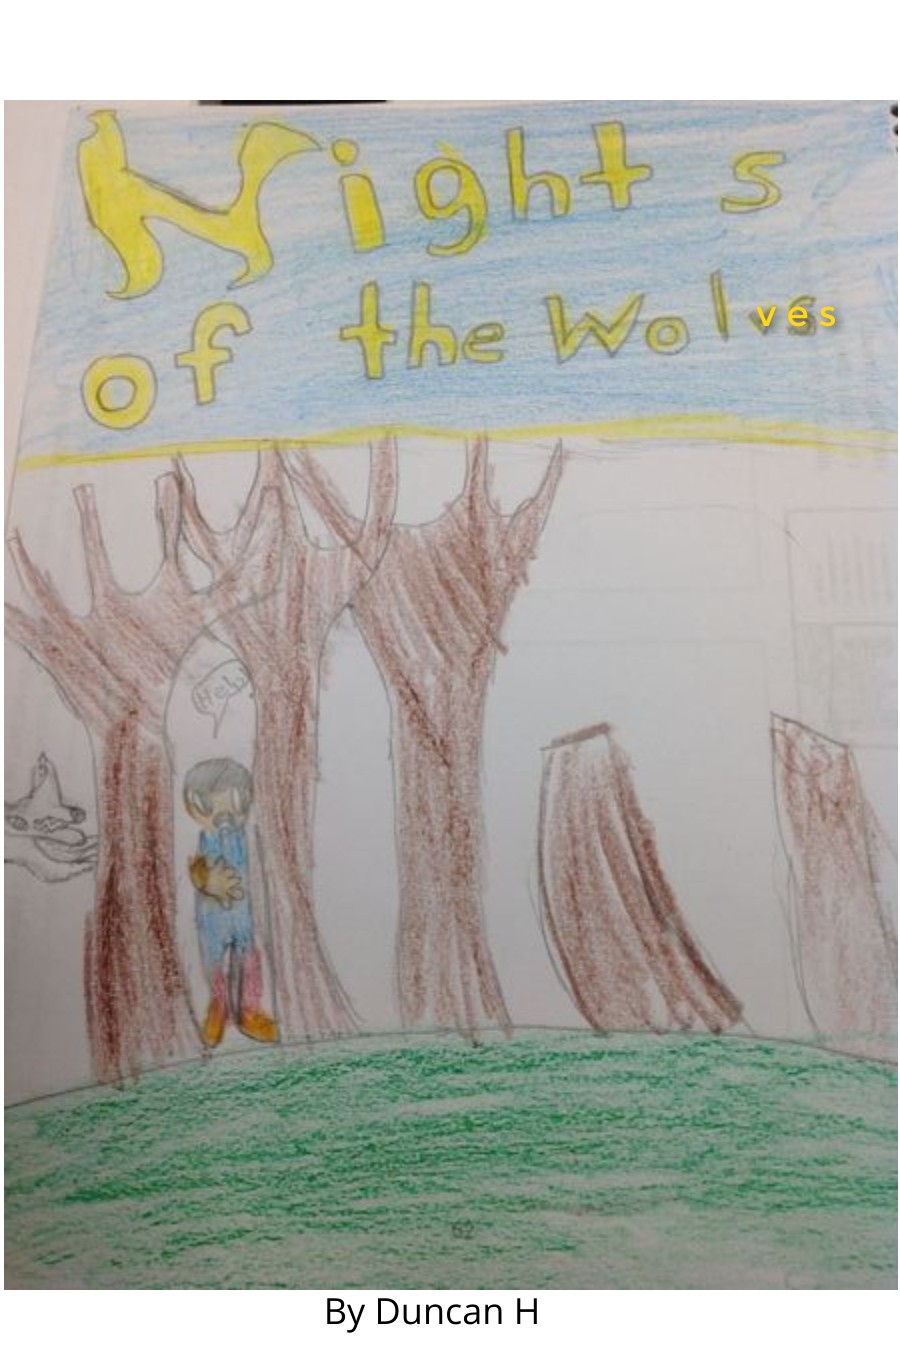 The Captain And The Sea Monster by Alexa C